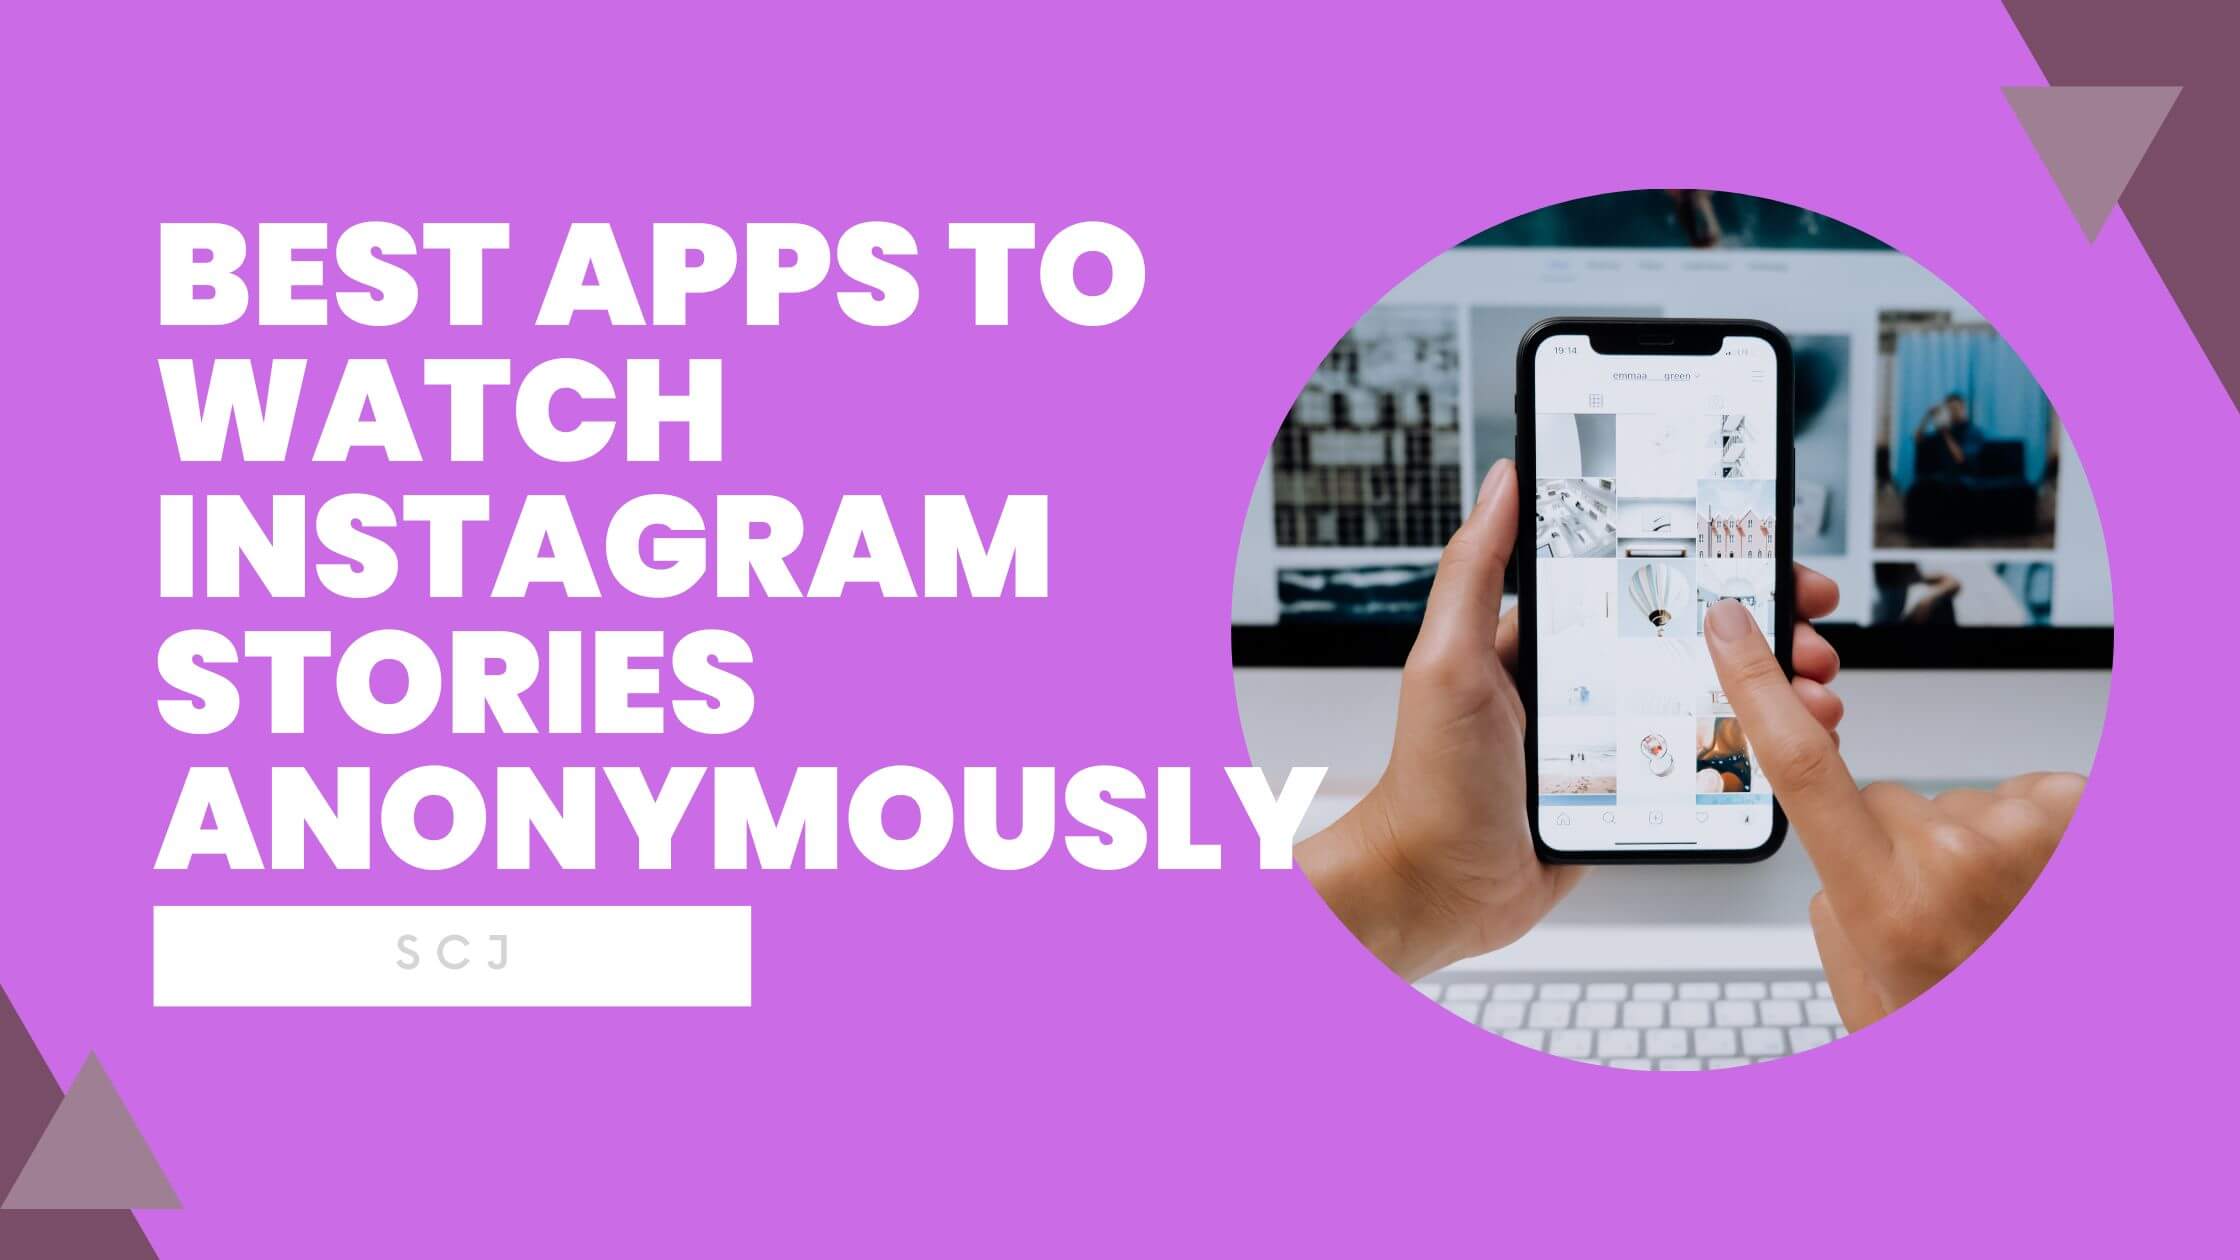 Best Apps to Watch Instagram Stories Anonymously